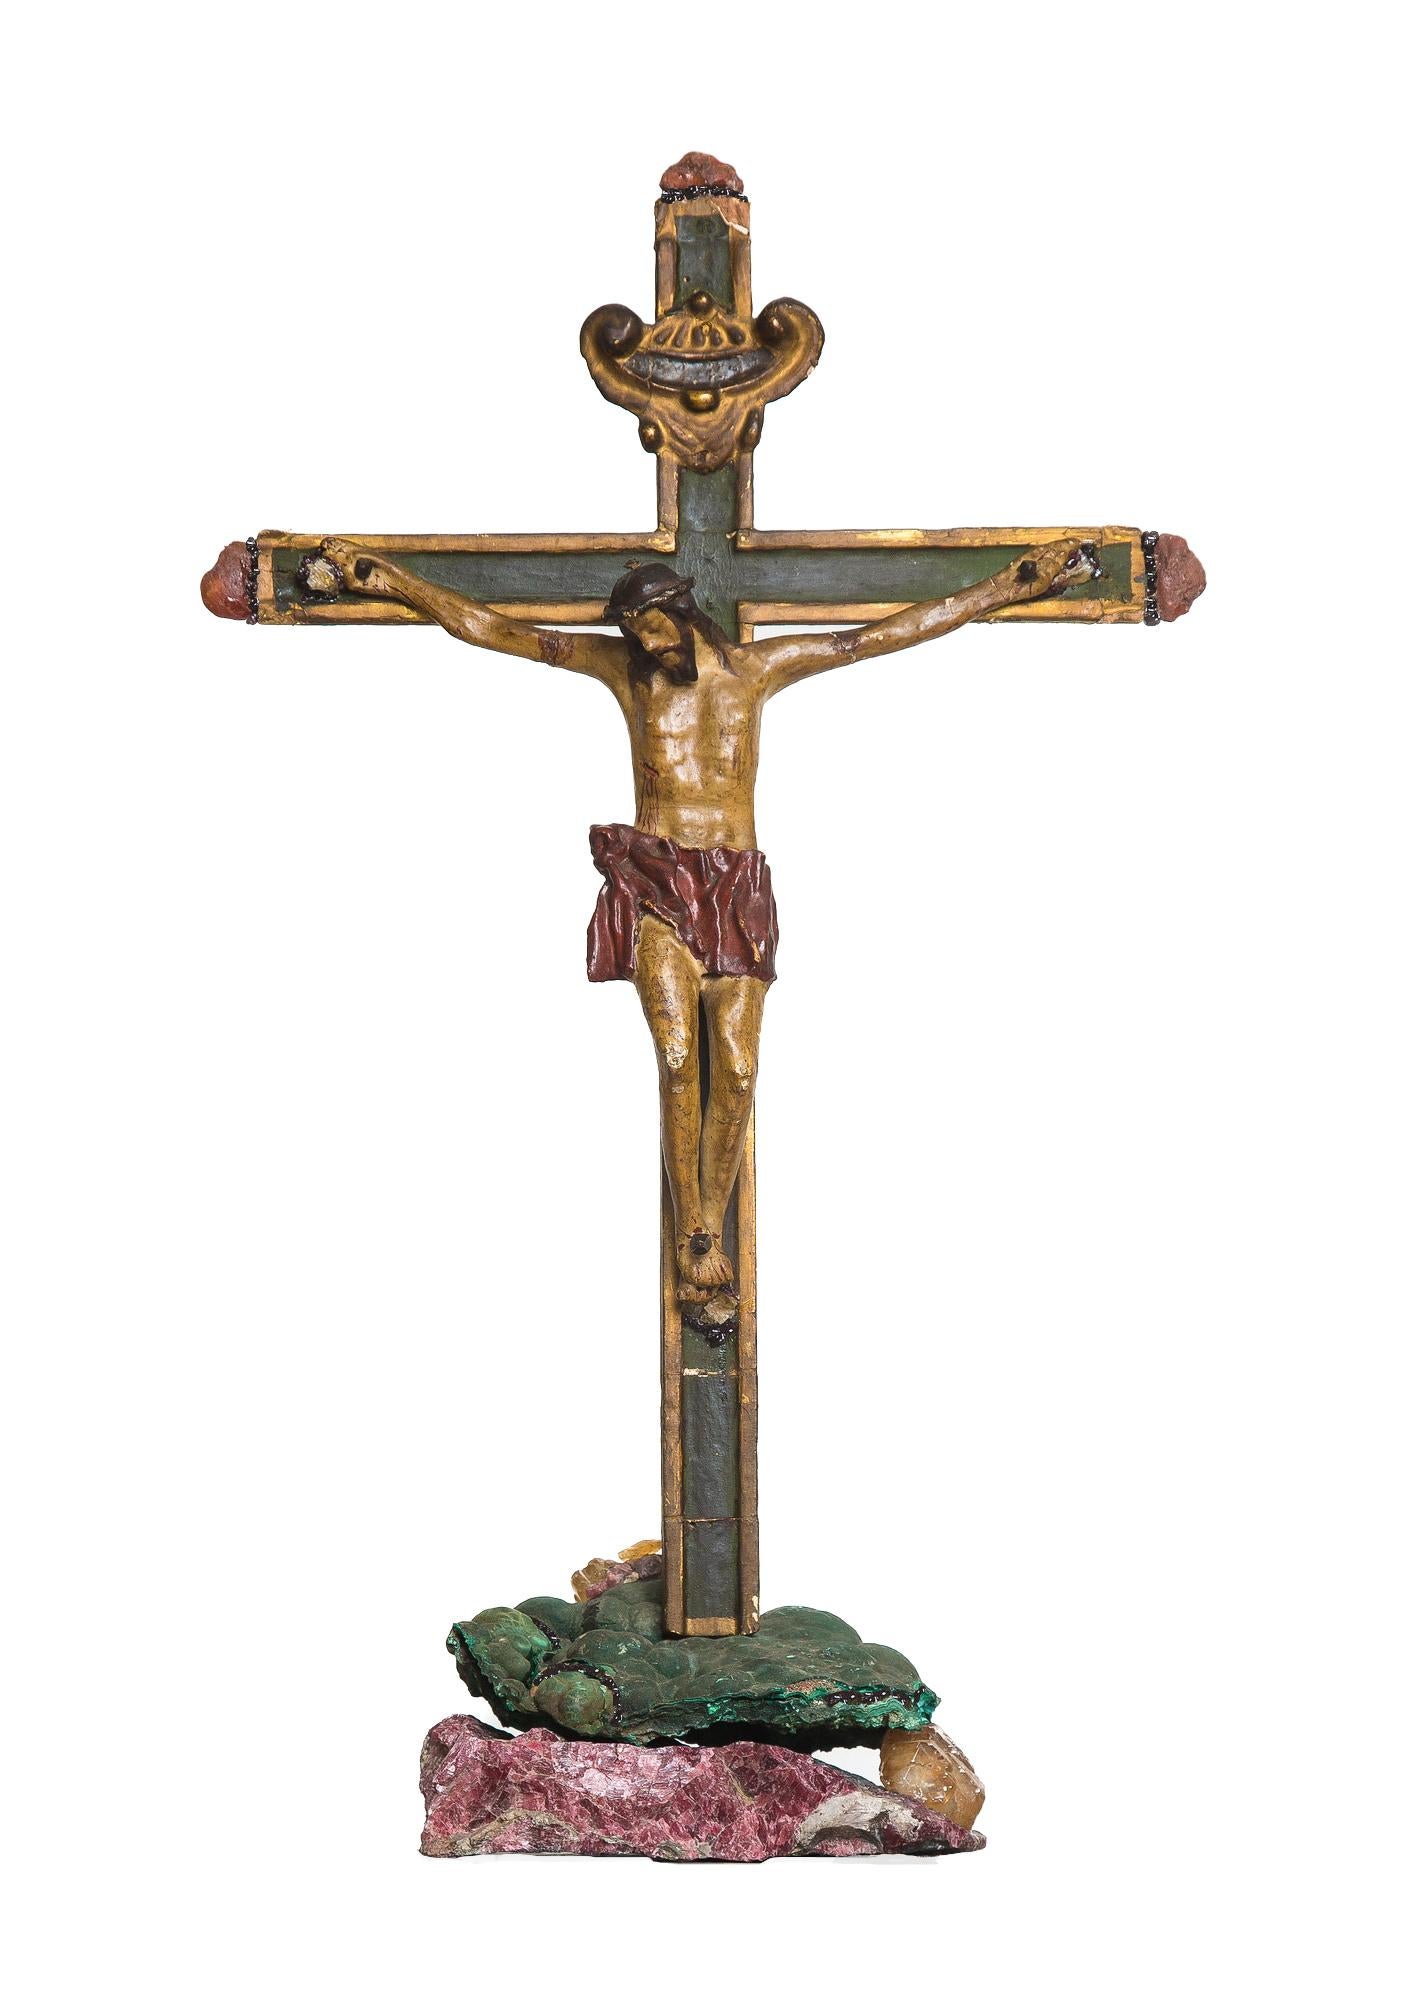 18th century Italian crucifix mounted on green malachite, calcite with fluorite, and raspberry garnet. The piece is adorned with Carnelian pebbles and garnet. The minerals are from all around the world - the green malachite is from Congo, the